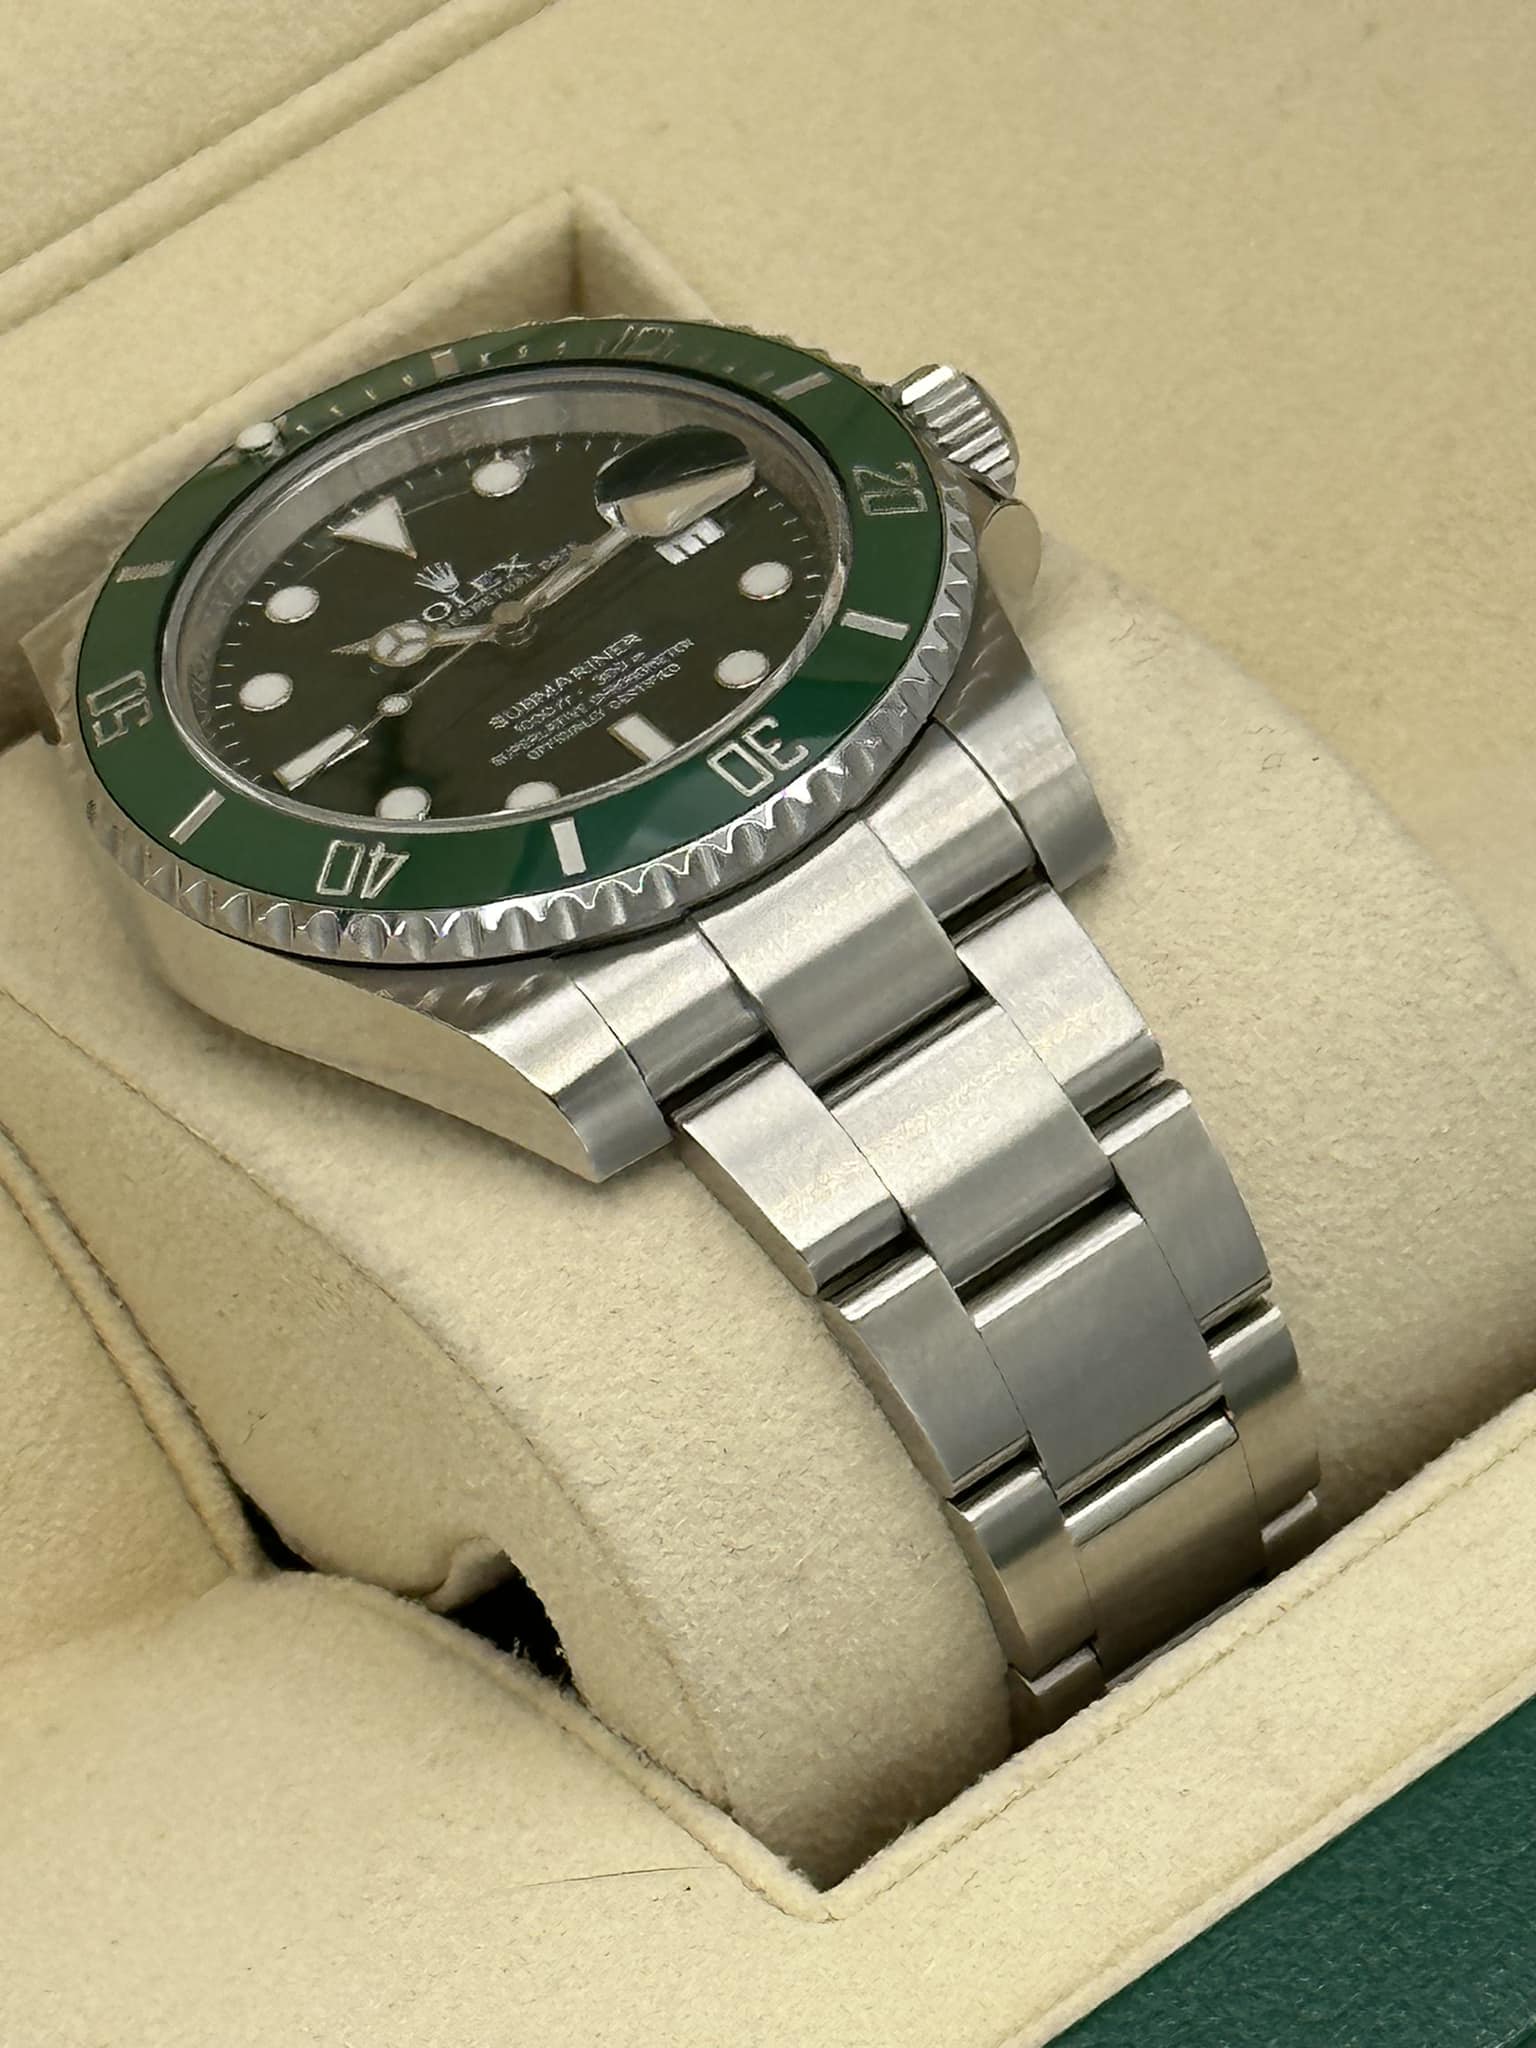 2016 Rolex Submariner "Hulk" 116610LV Stainless Steel Green Dial - MyWatchLLC